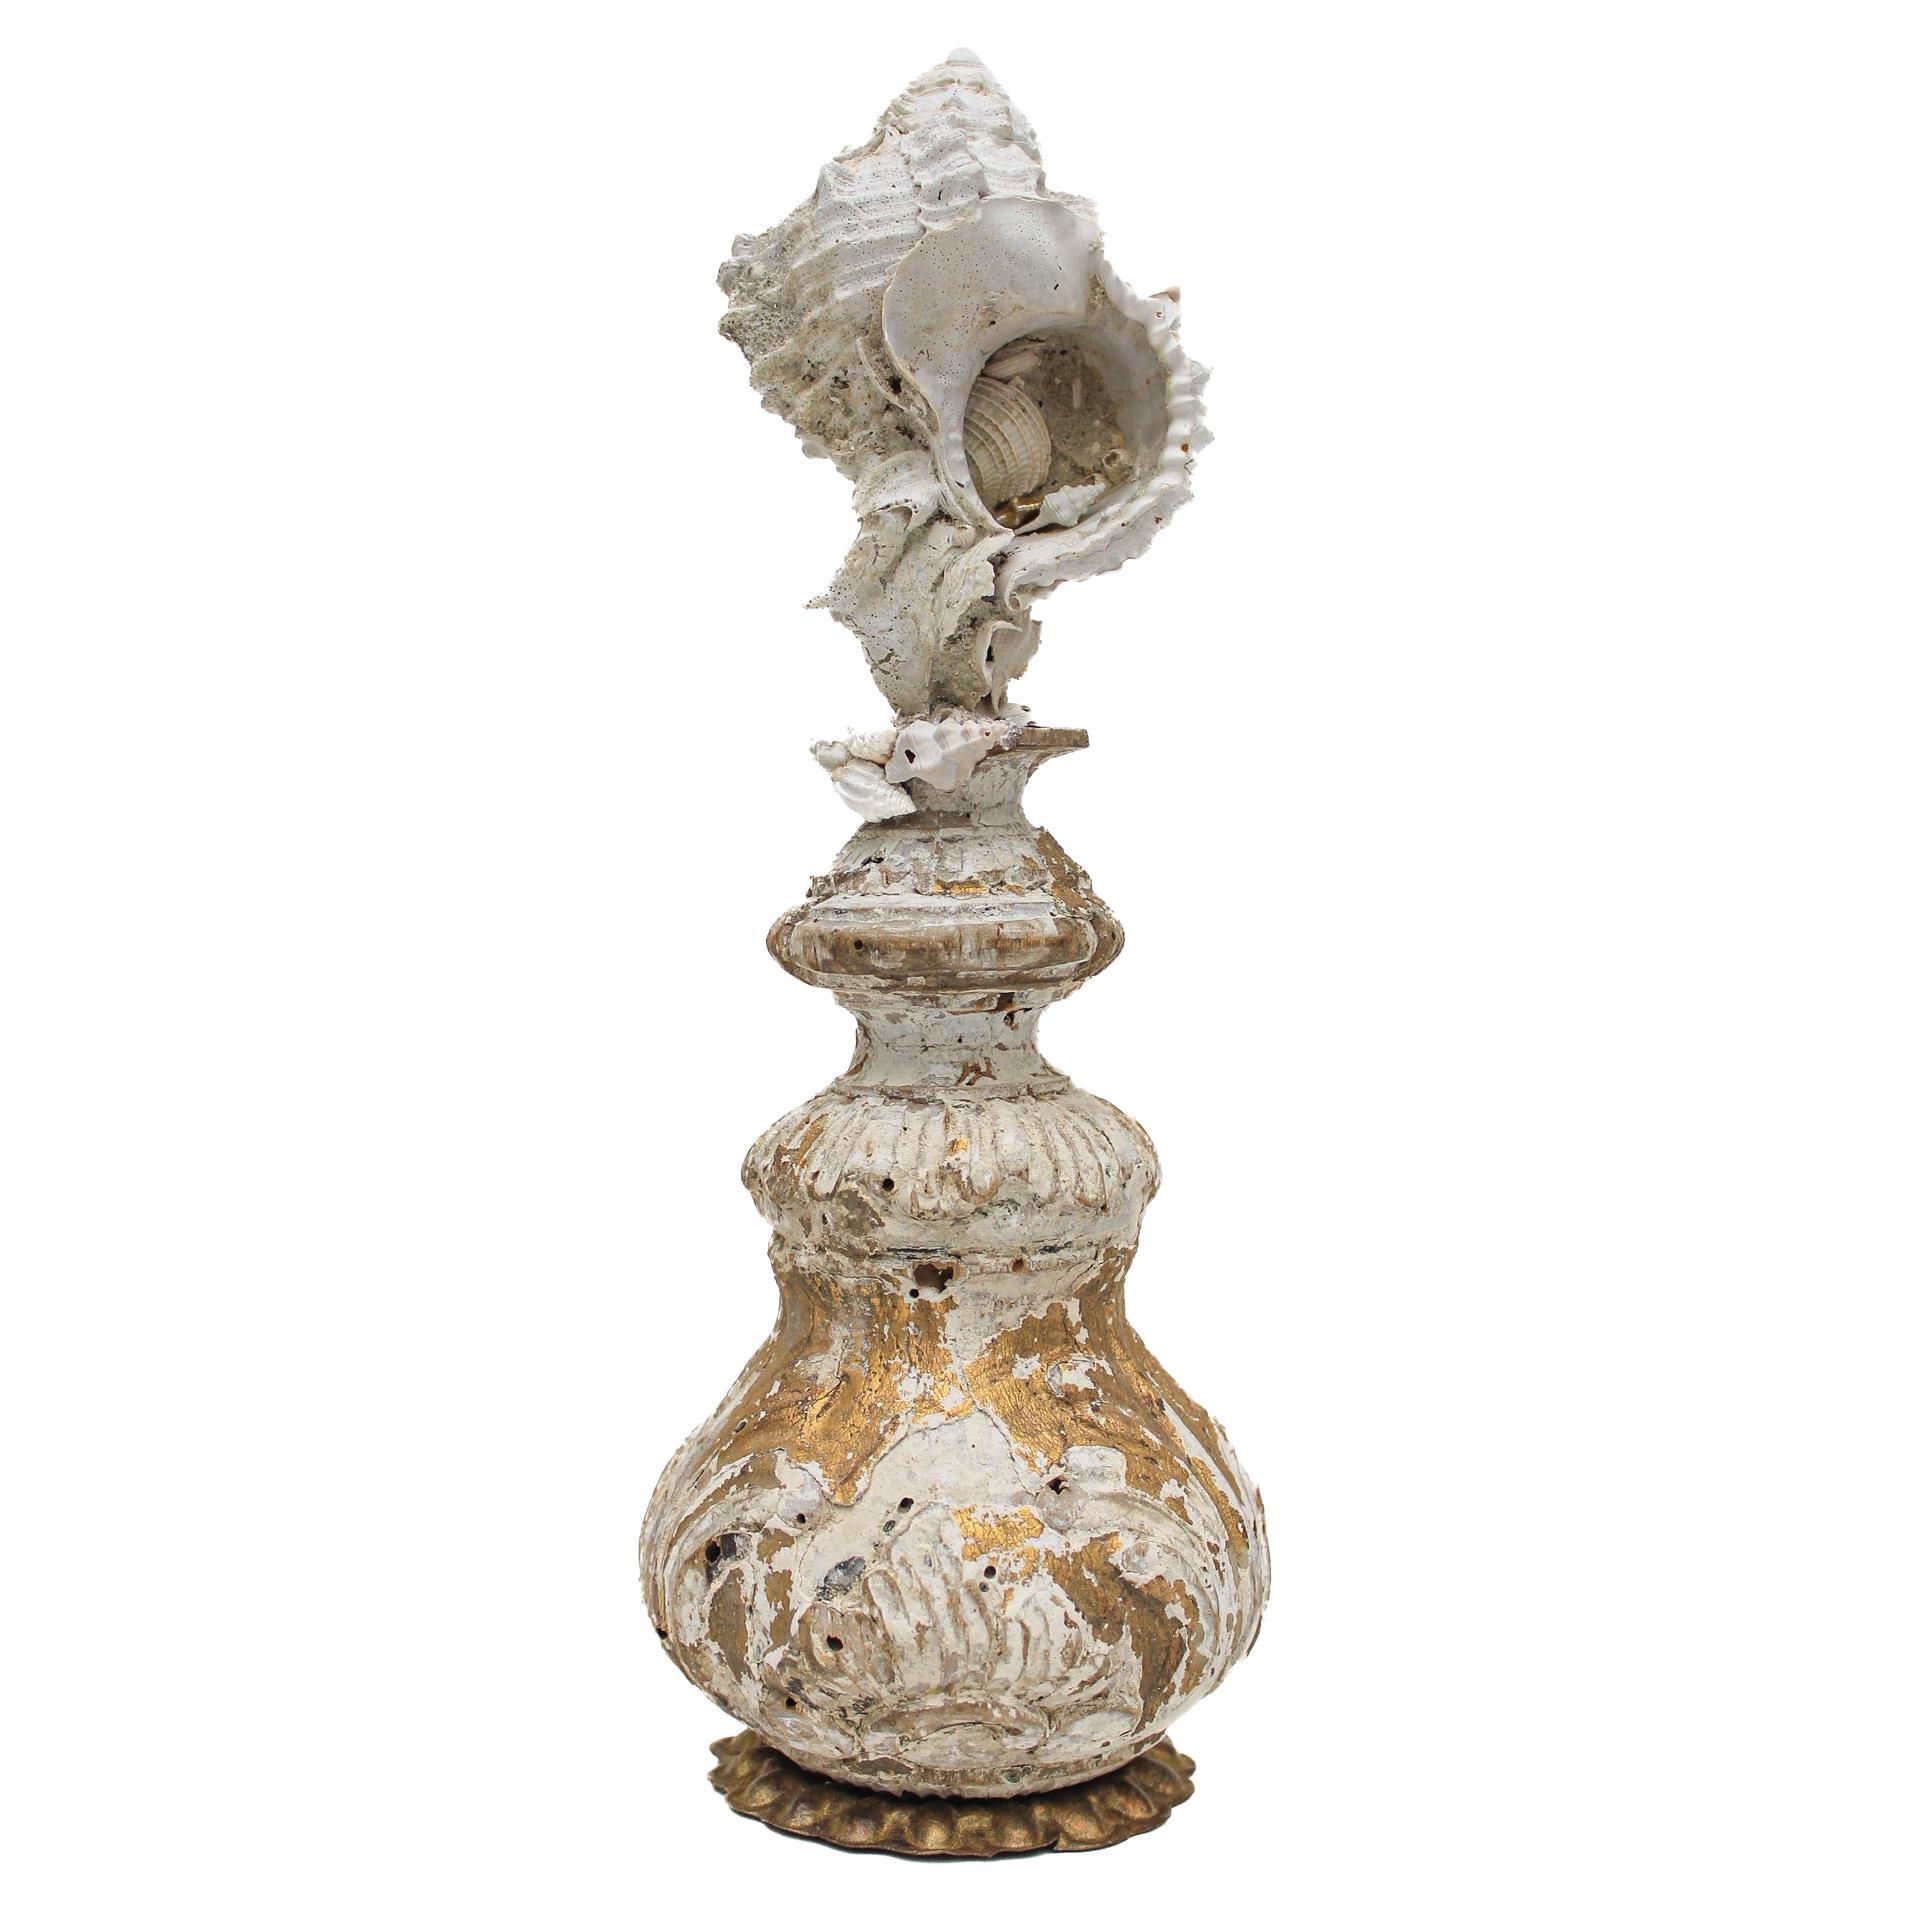 17th Century Italian Vase with a Hystrivasum Shell on an Antique Metal Stand